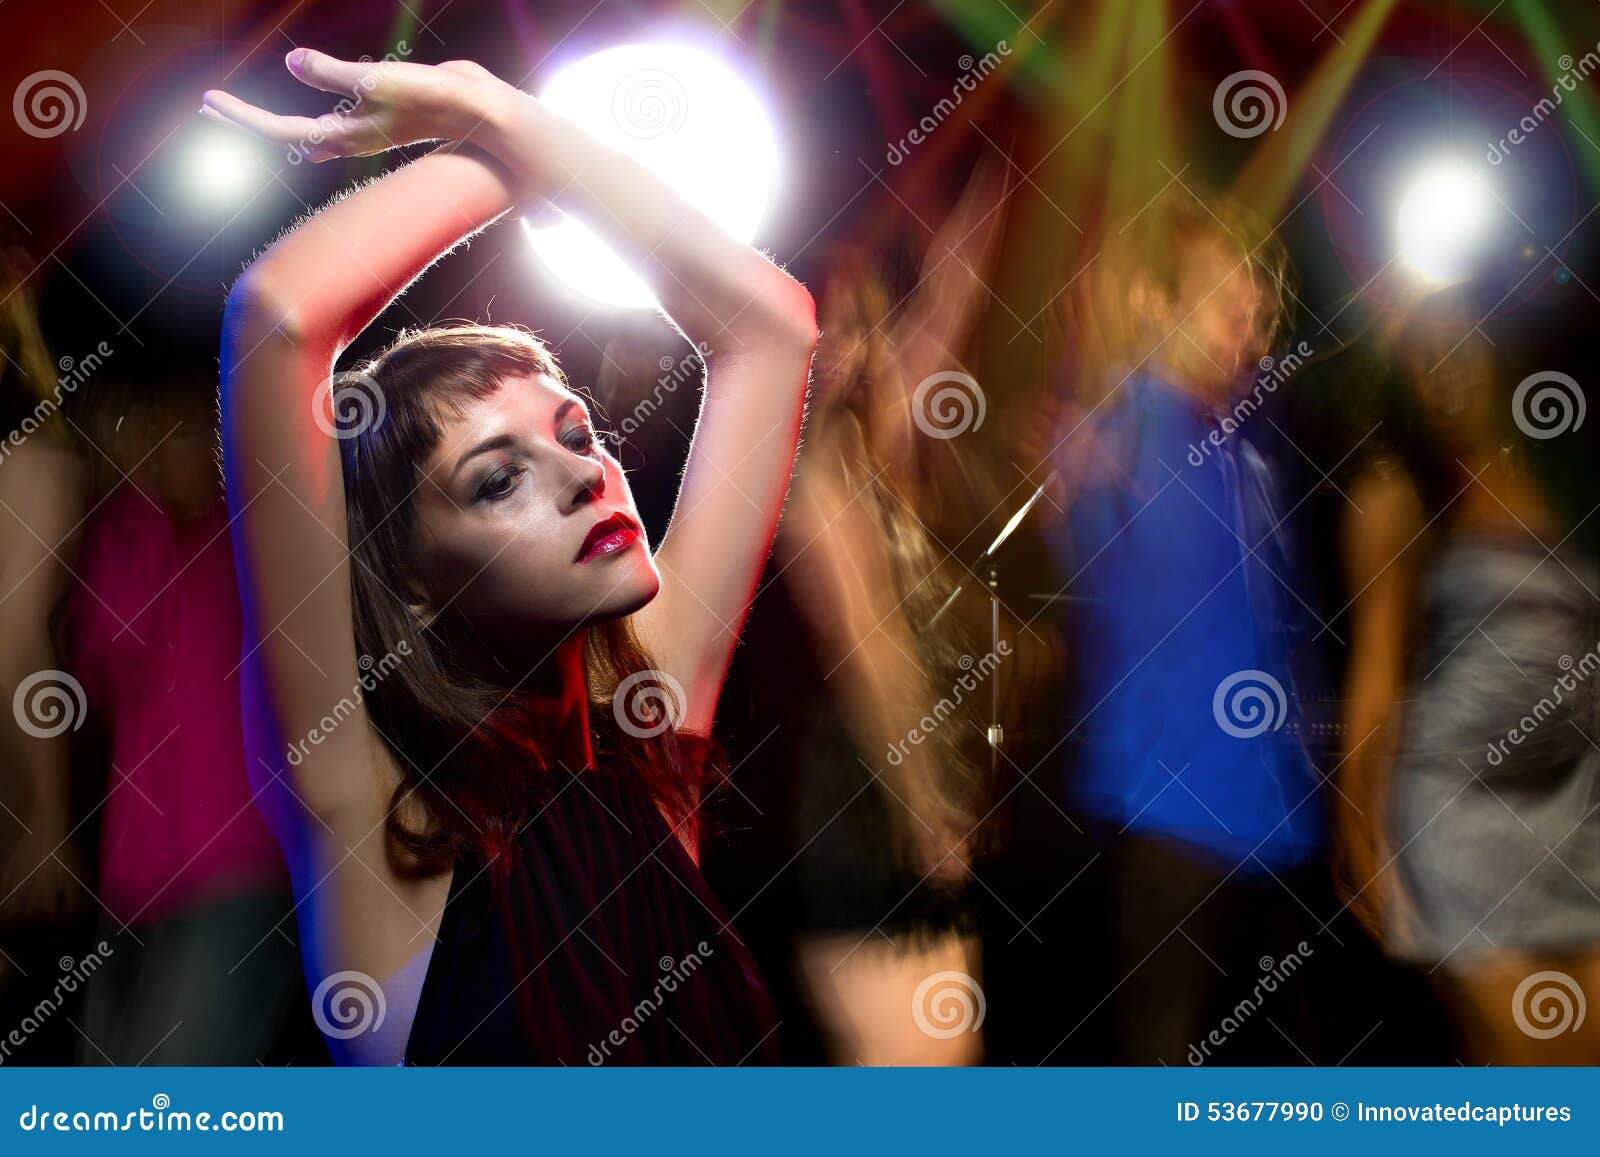 woman high on drugs or drunk at a club